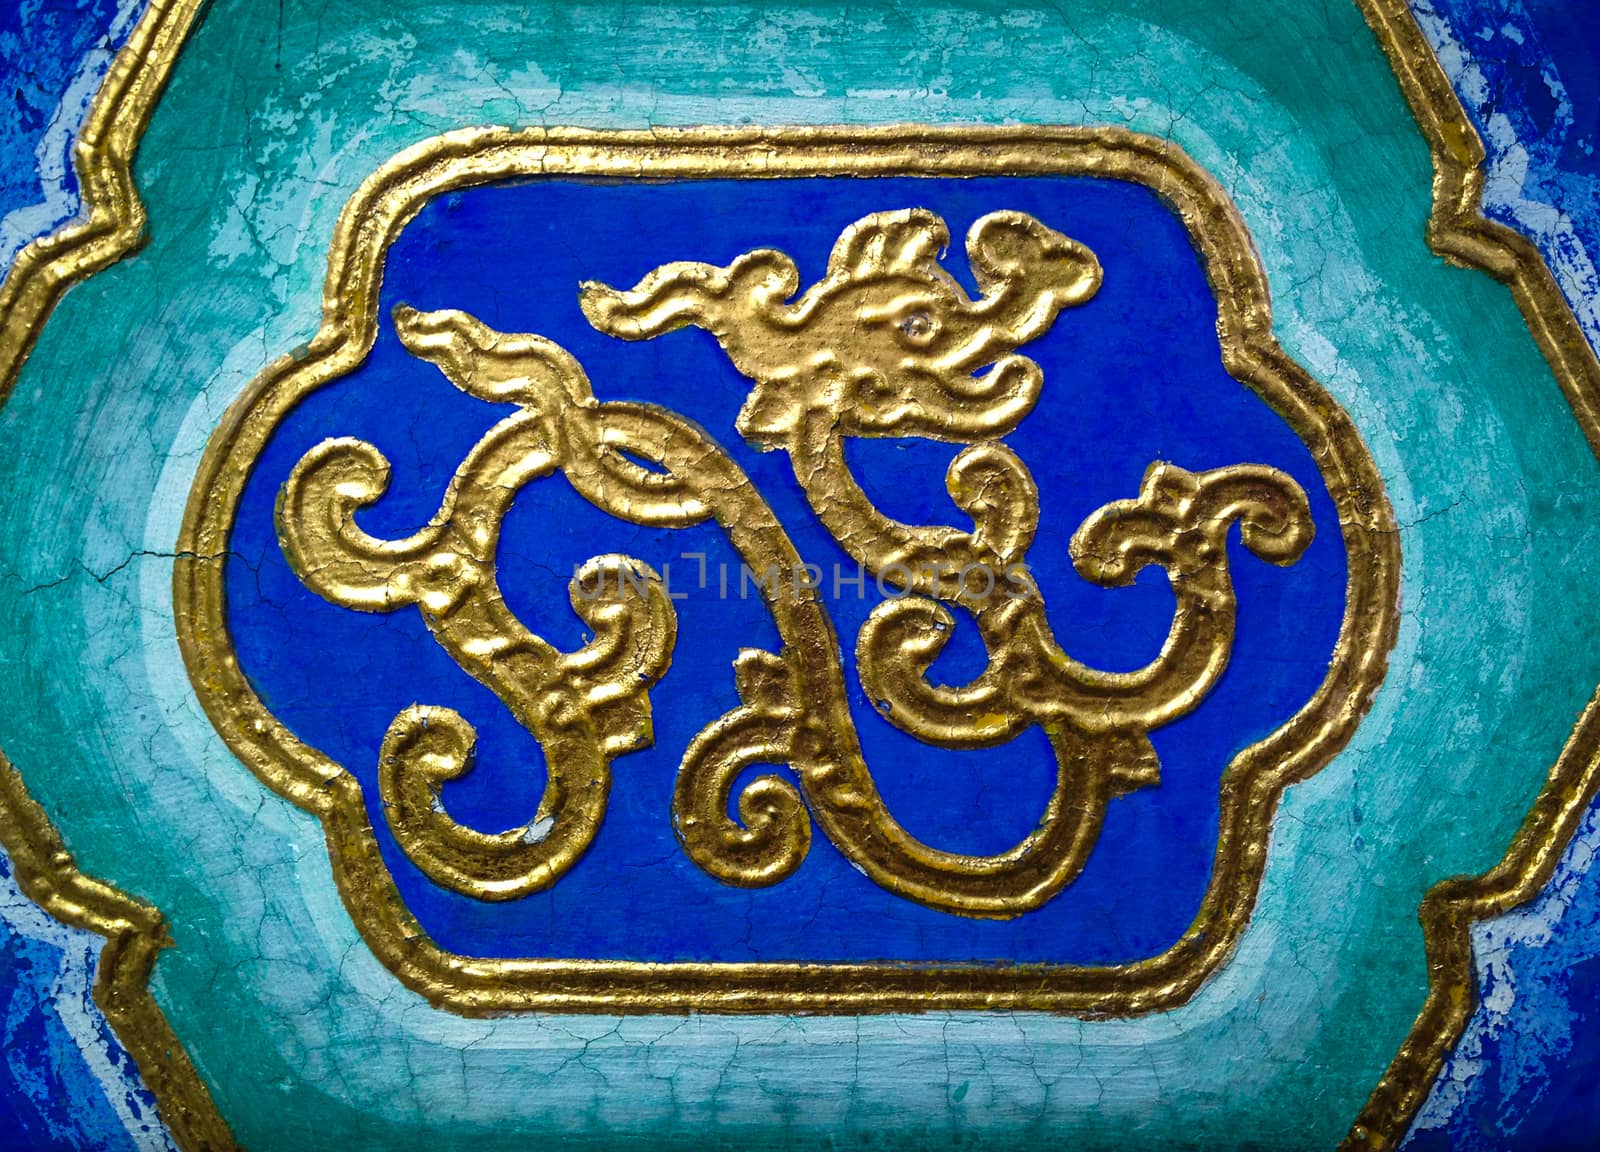 Abstract golden dragon on a ceiling in a temple.